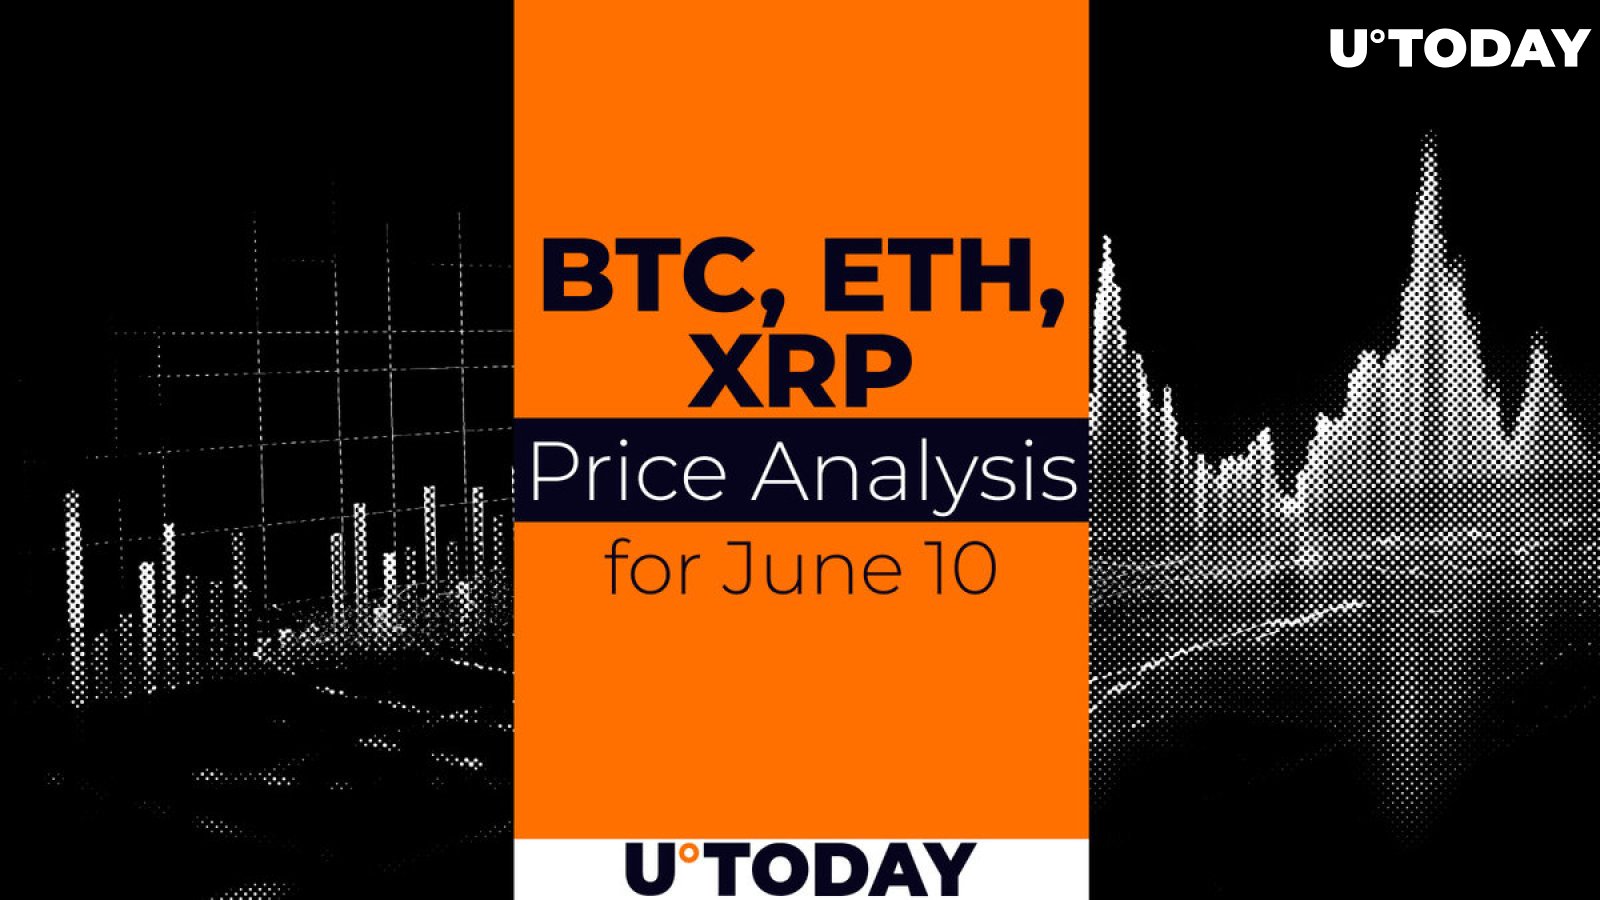 BTC, ETH and XRP Price Prediction for June 10